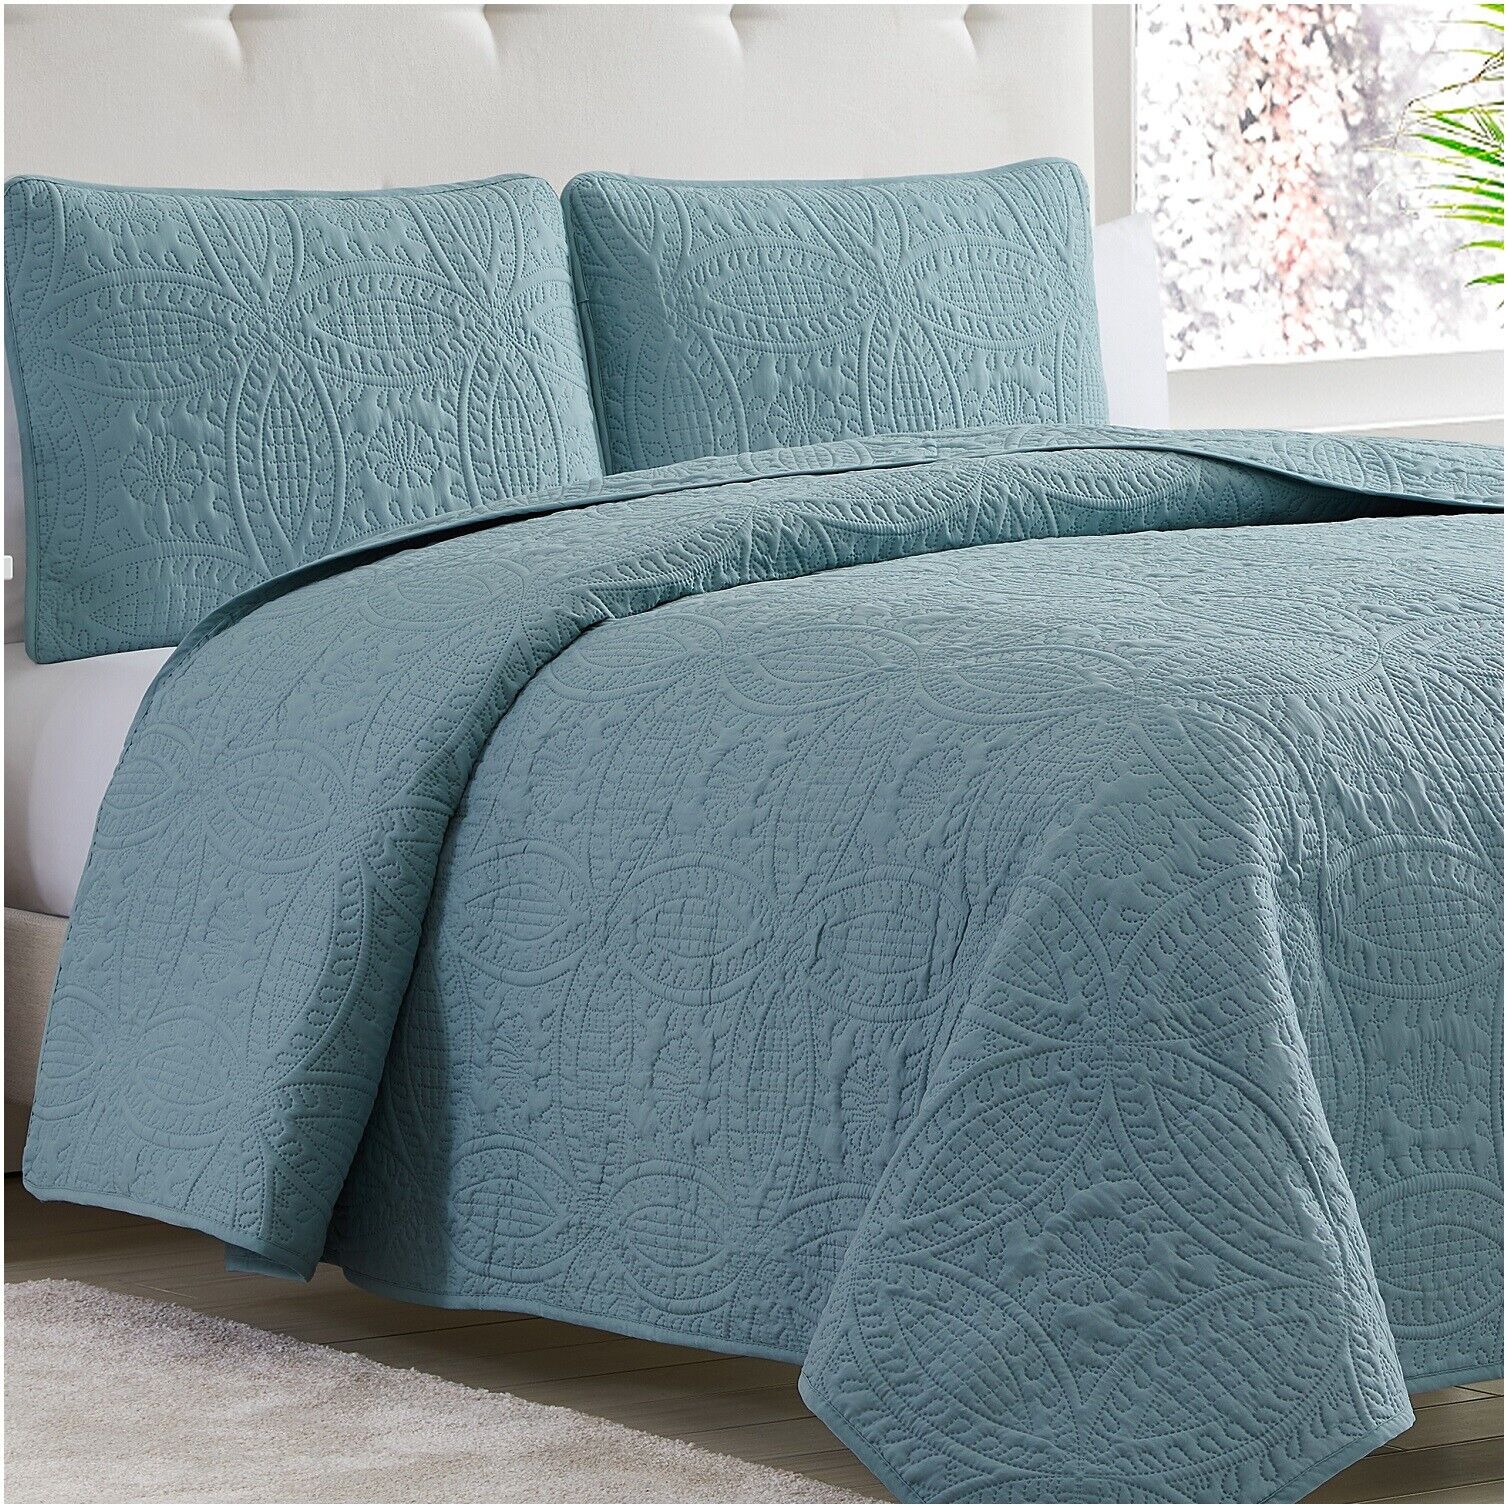 Mellanni Bedspread Coverlet Set 3-Piece Oversized Bed Cover, Ultrasonic Quilt